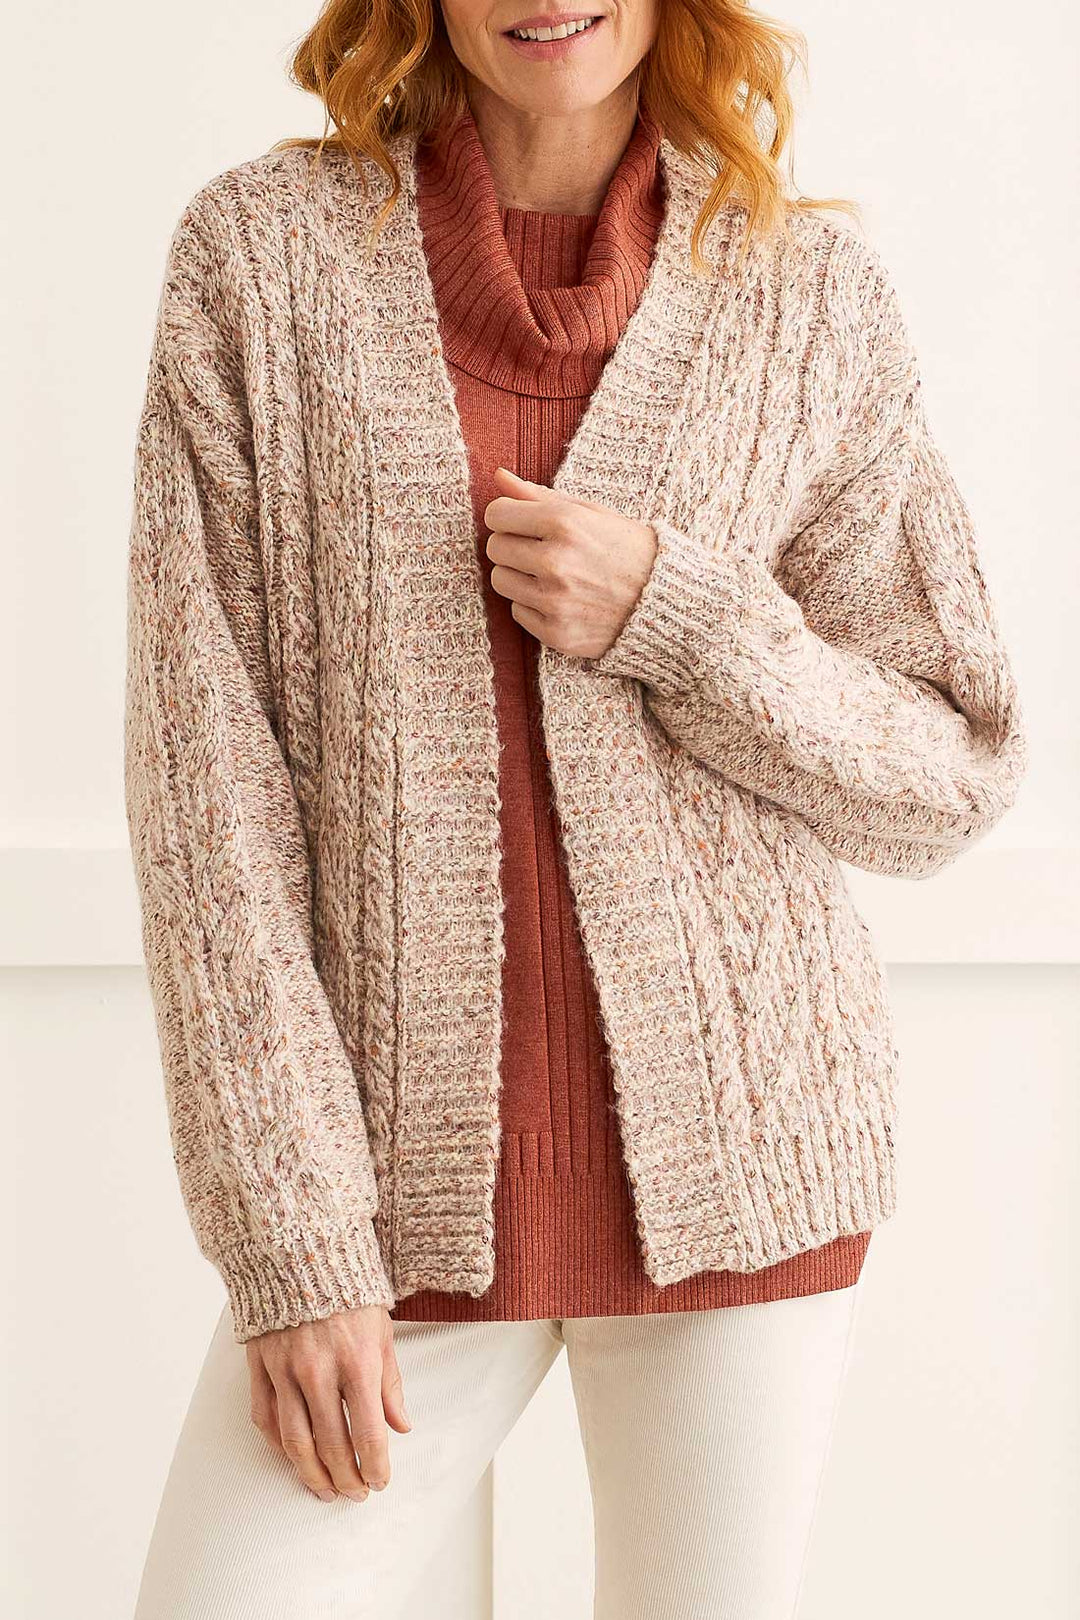 COCOON SWEATER CARDIGAN - OYSTER